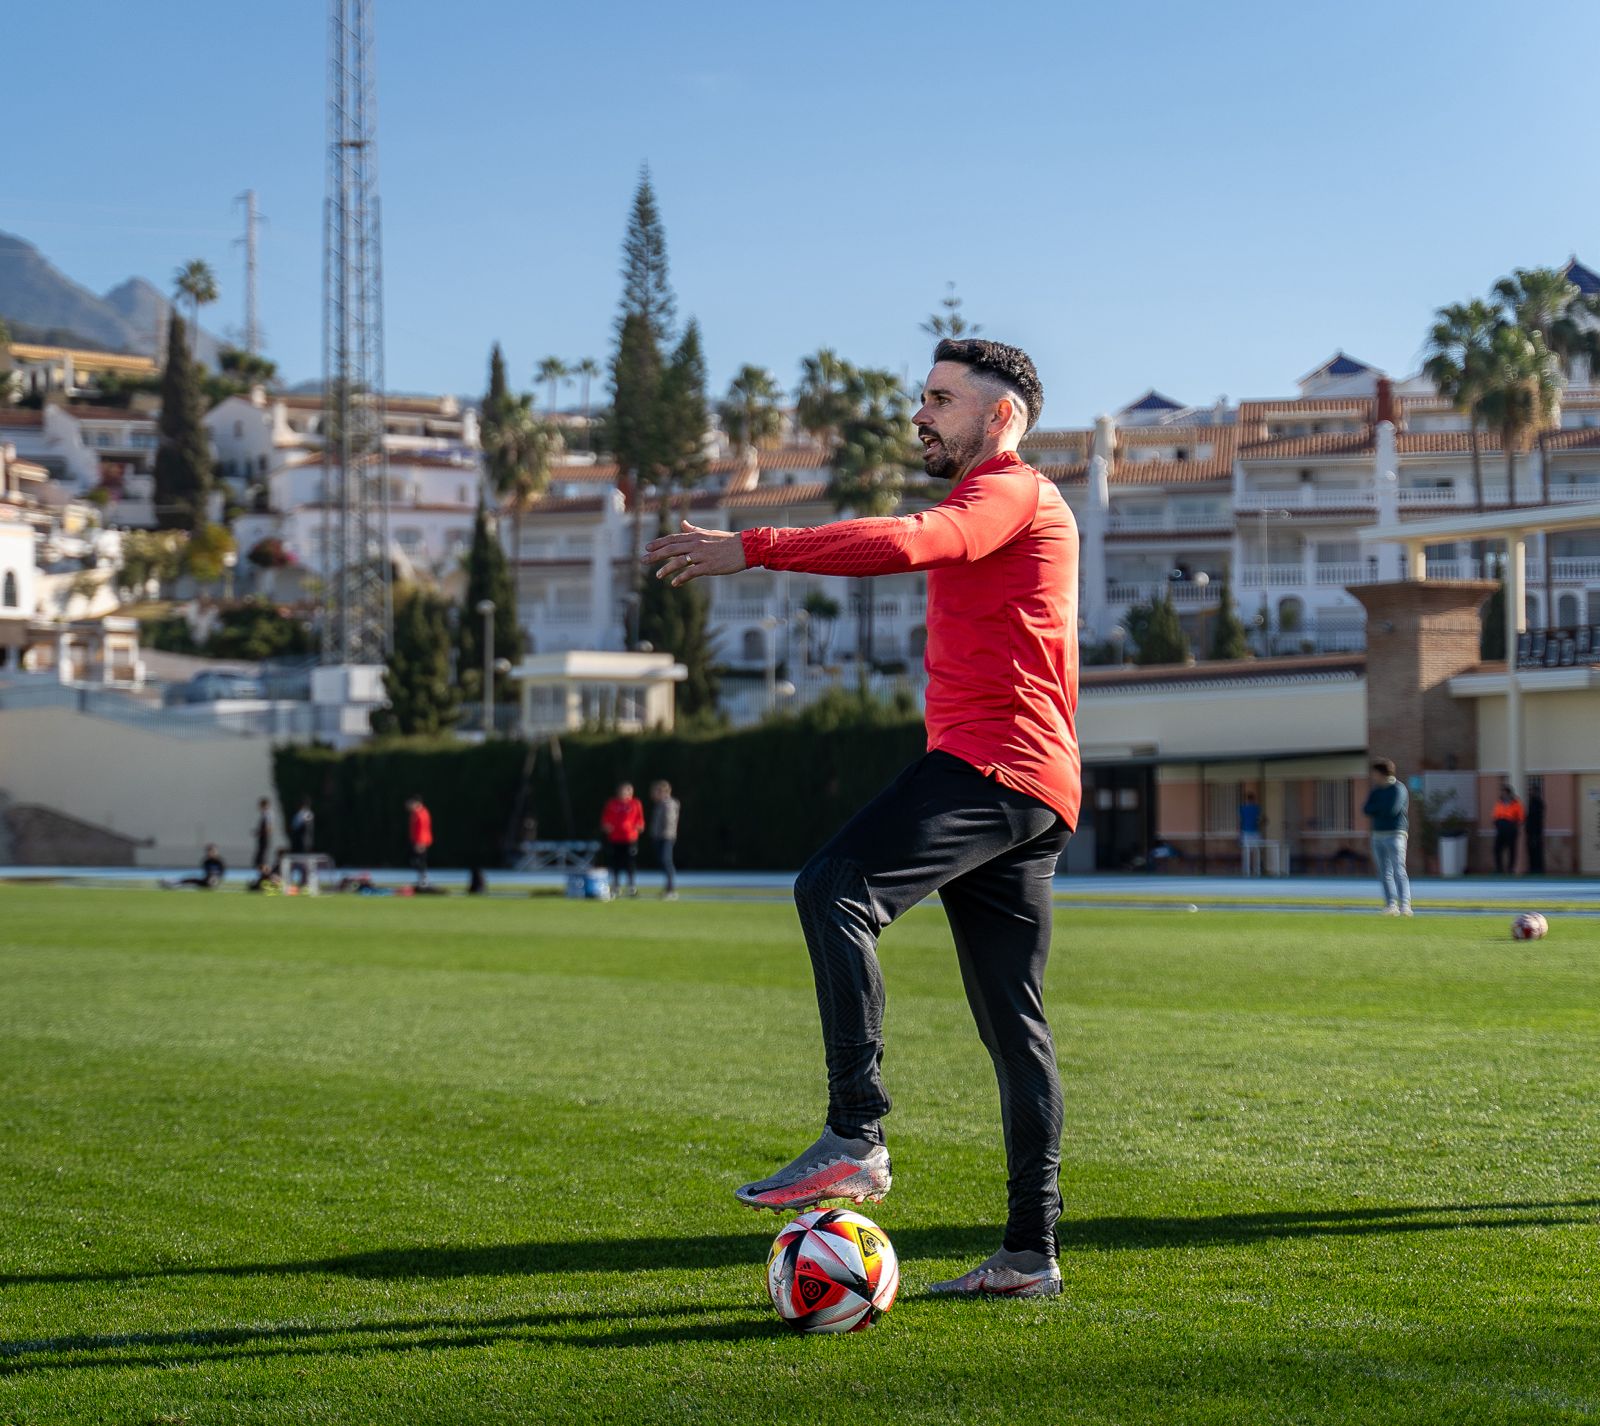 EXCLUSIVE: Im a British expat and started my own football club in Spainweve rocketed through the leagues and now were playing at a national level – this is our winning formula [Video]